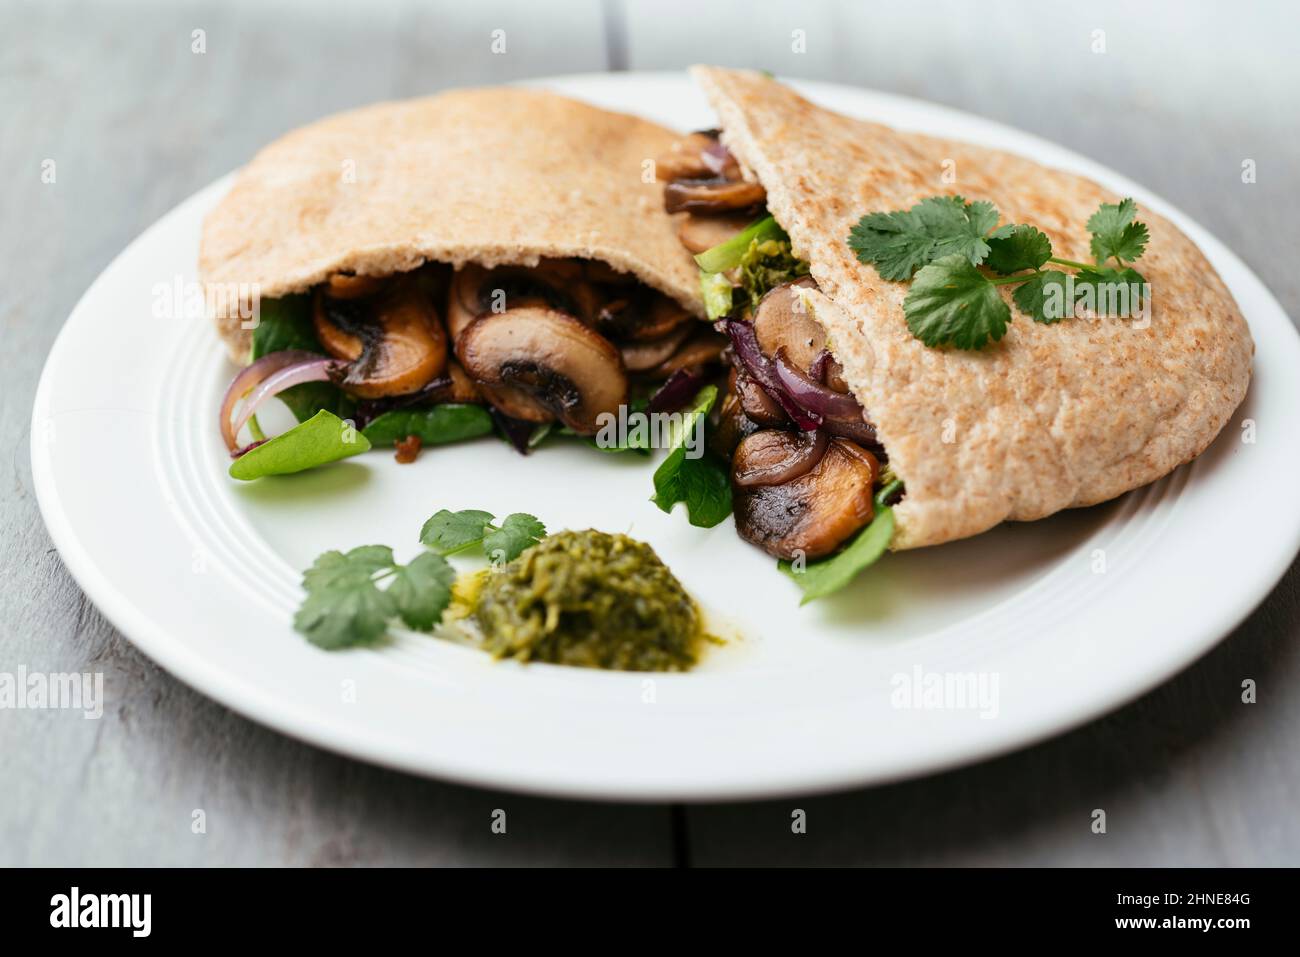 Pita breads filled with sauteed mushrooms and onions with winter purslane and corn salad, served with zhoug. Stock Photo